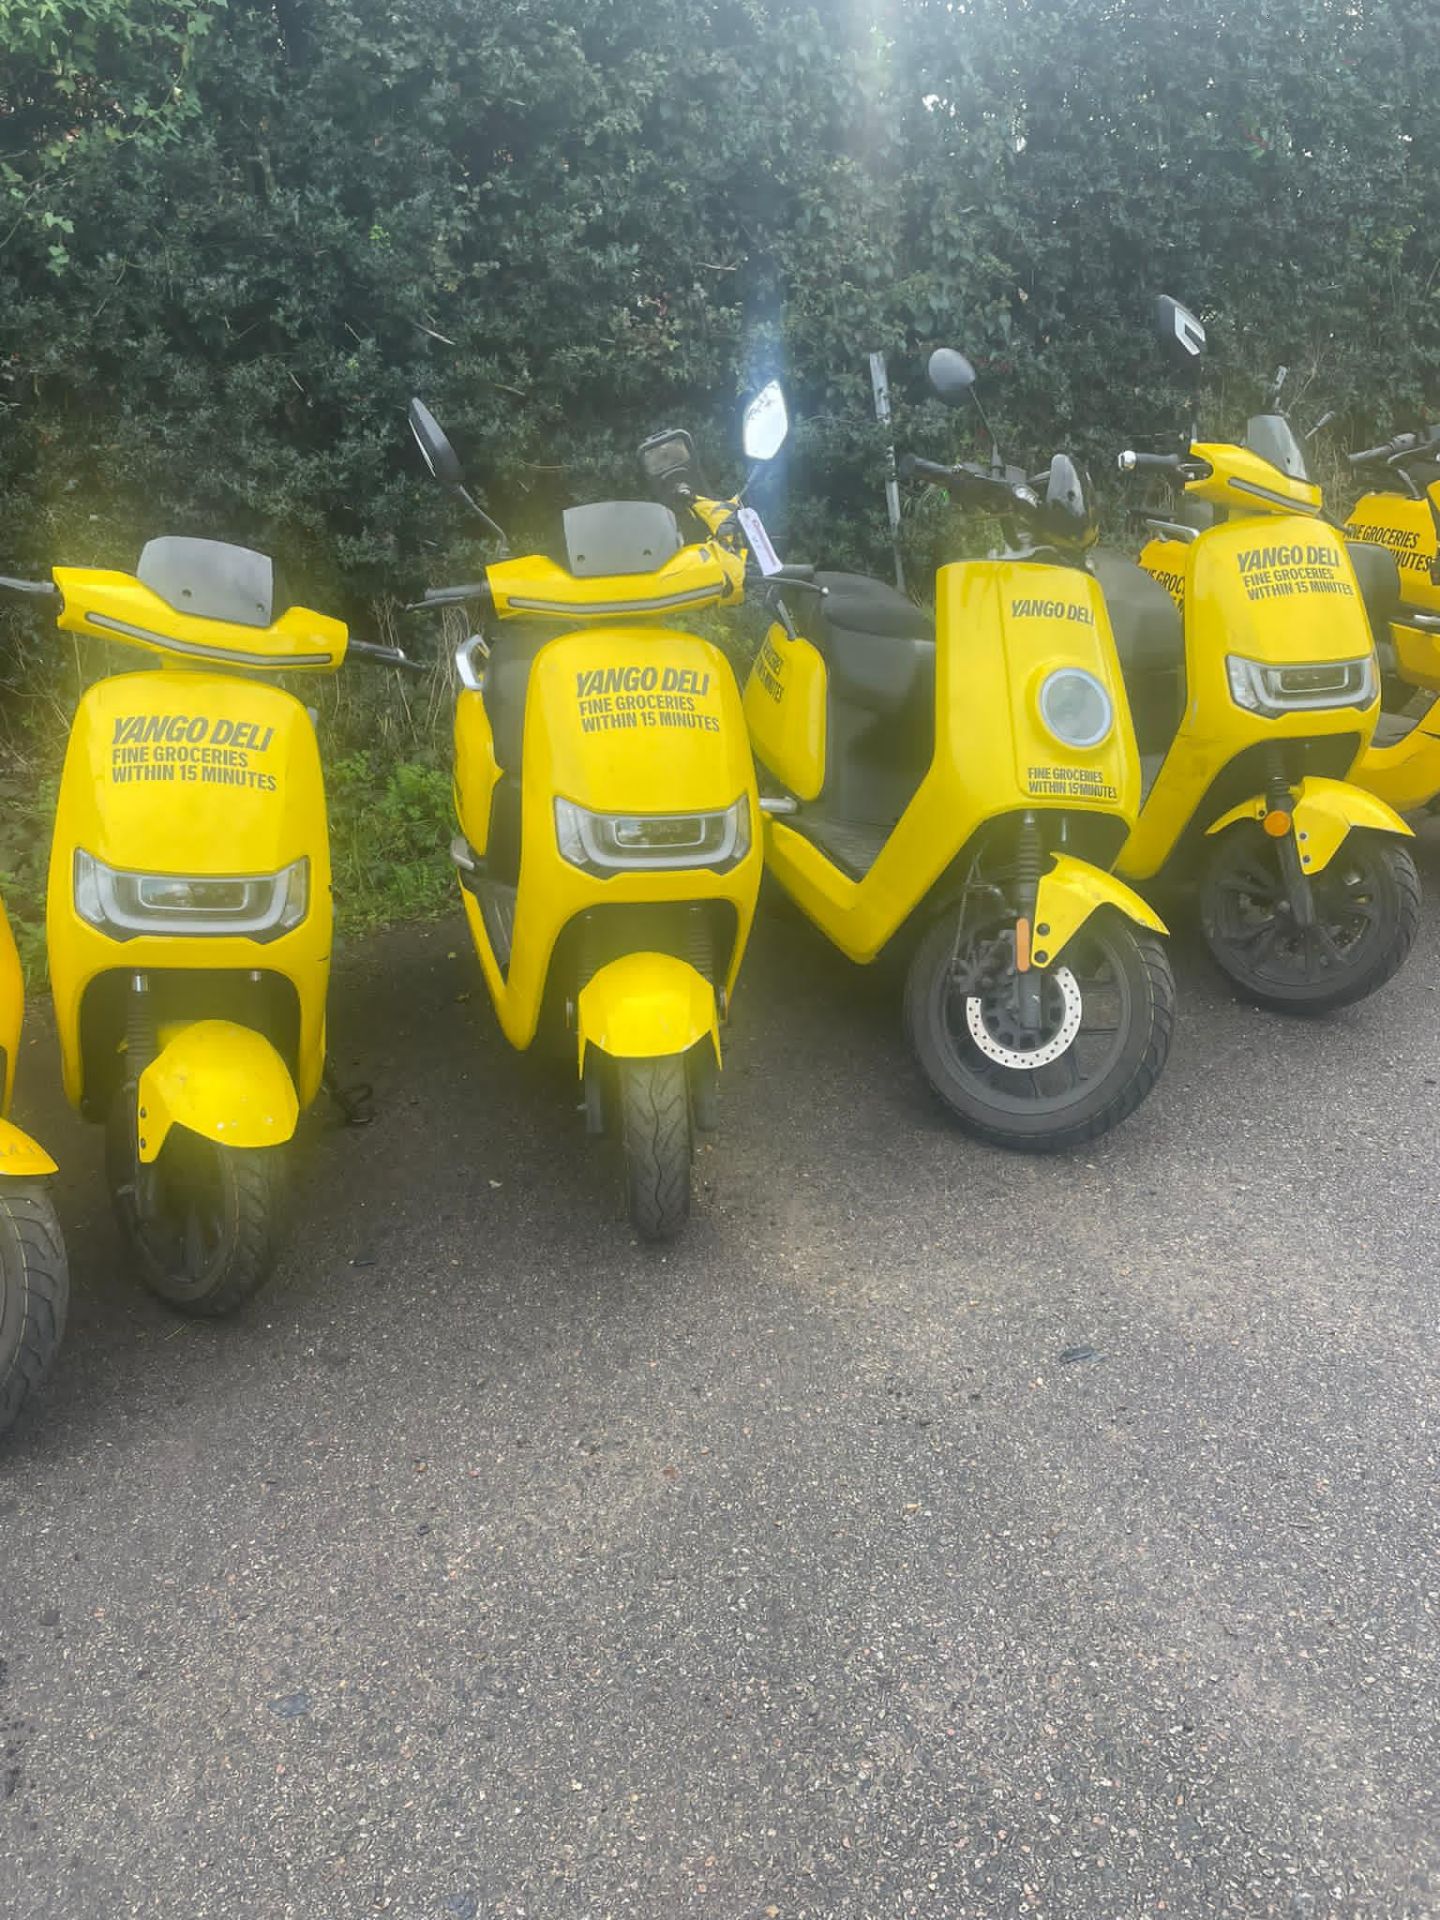 10 x Niu GTS & Sunra Robo S Electric Moped Scooters With Logbooks, Keys & Spares